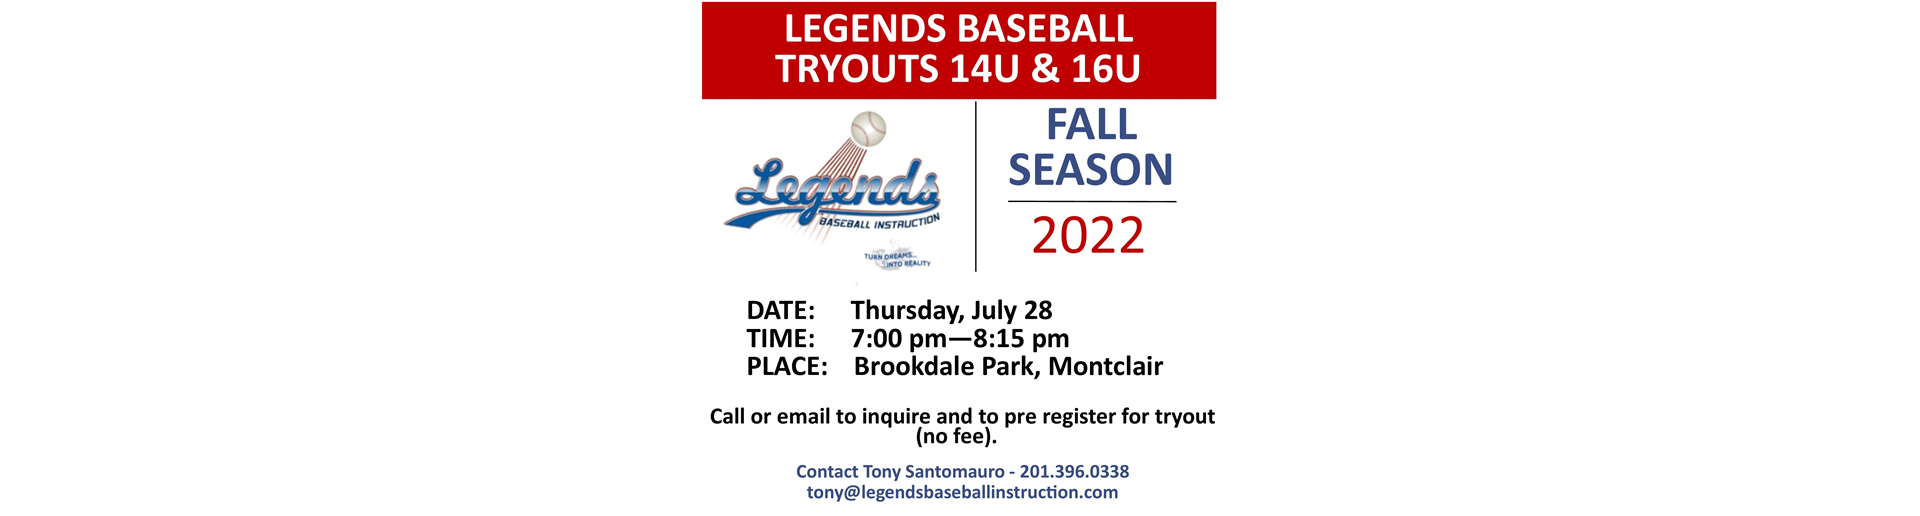 SUMMER TEAM TRYOUTS